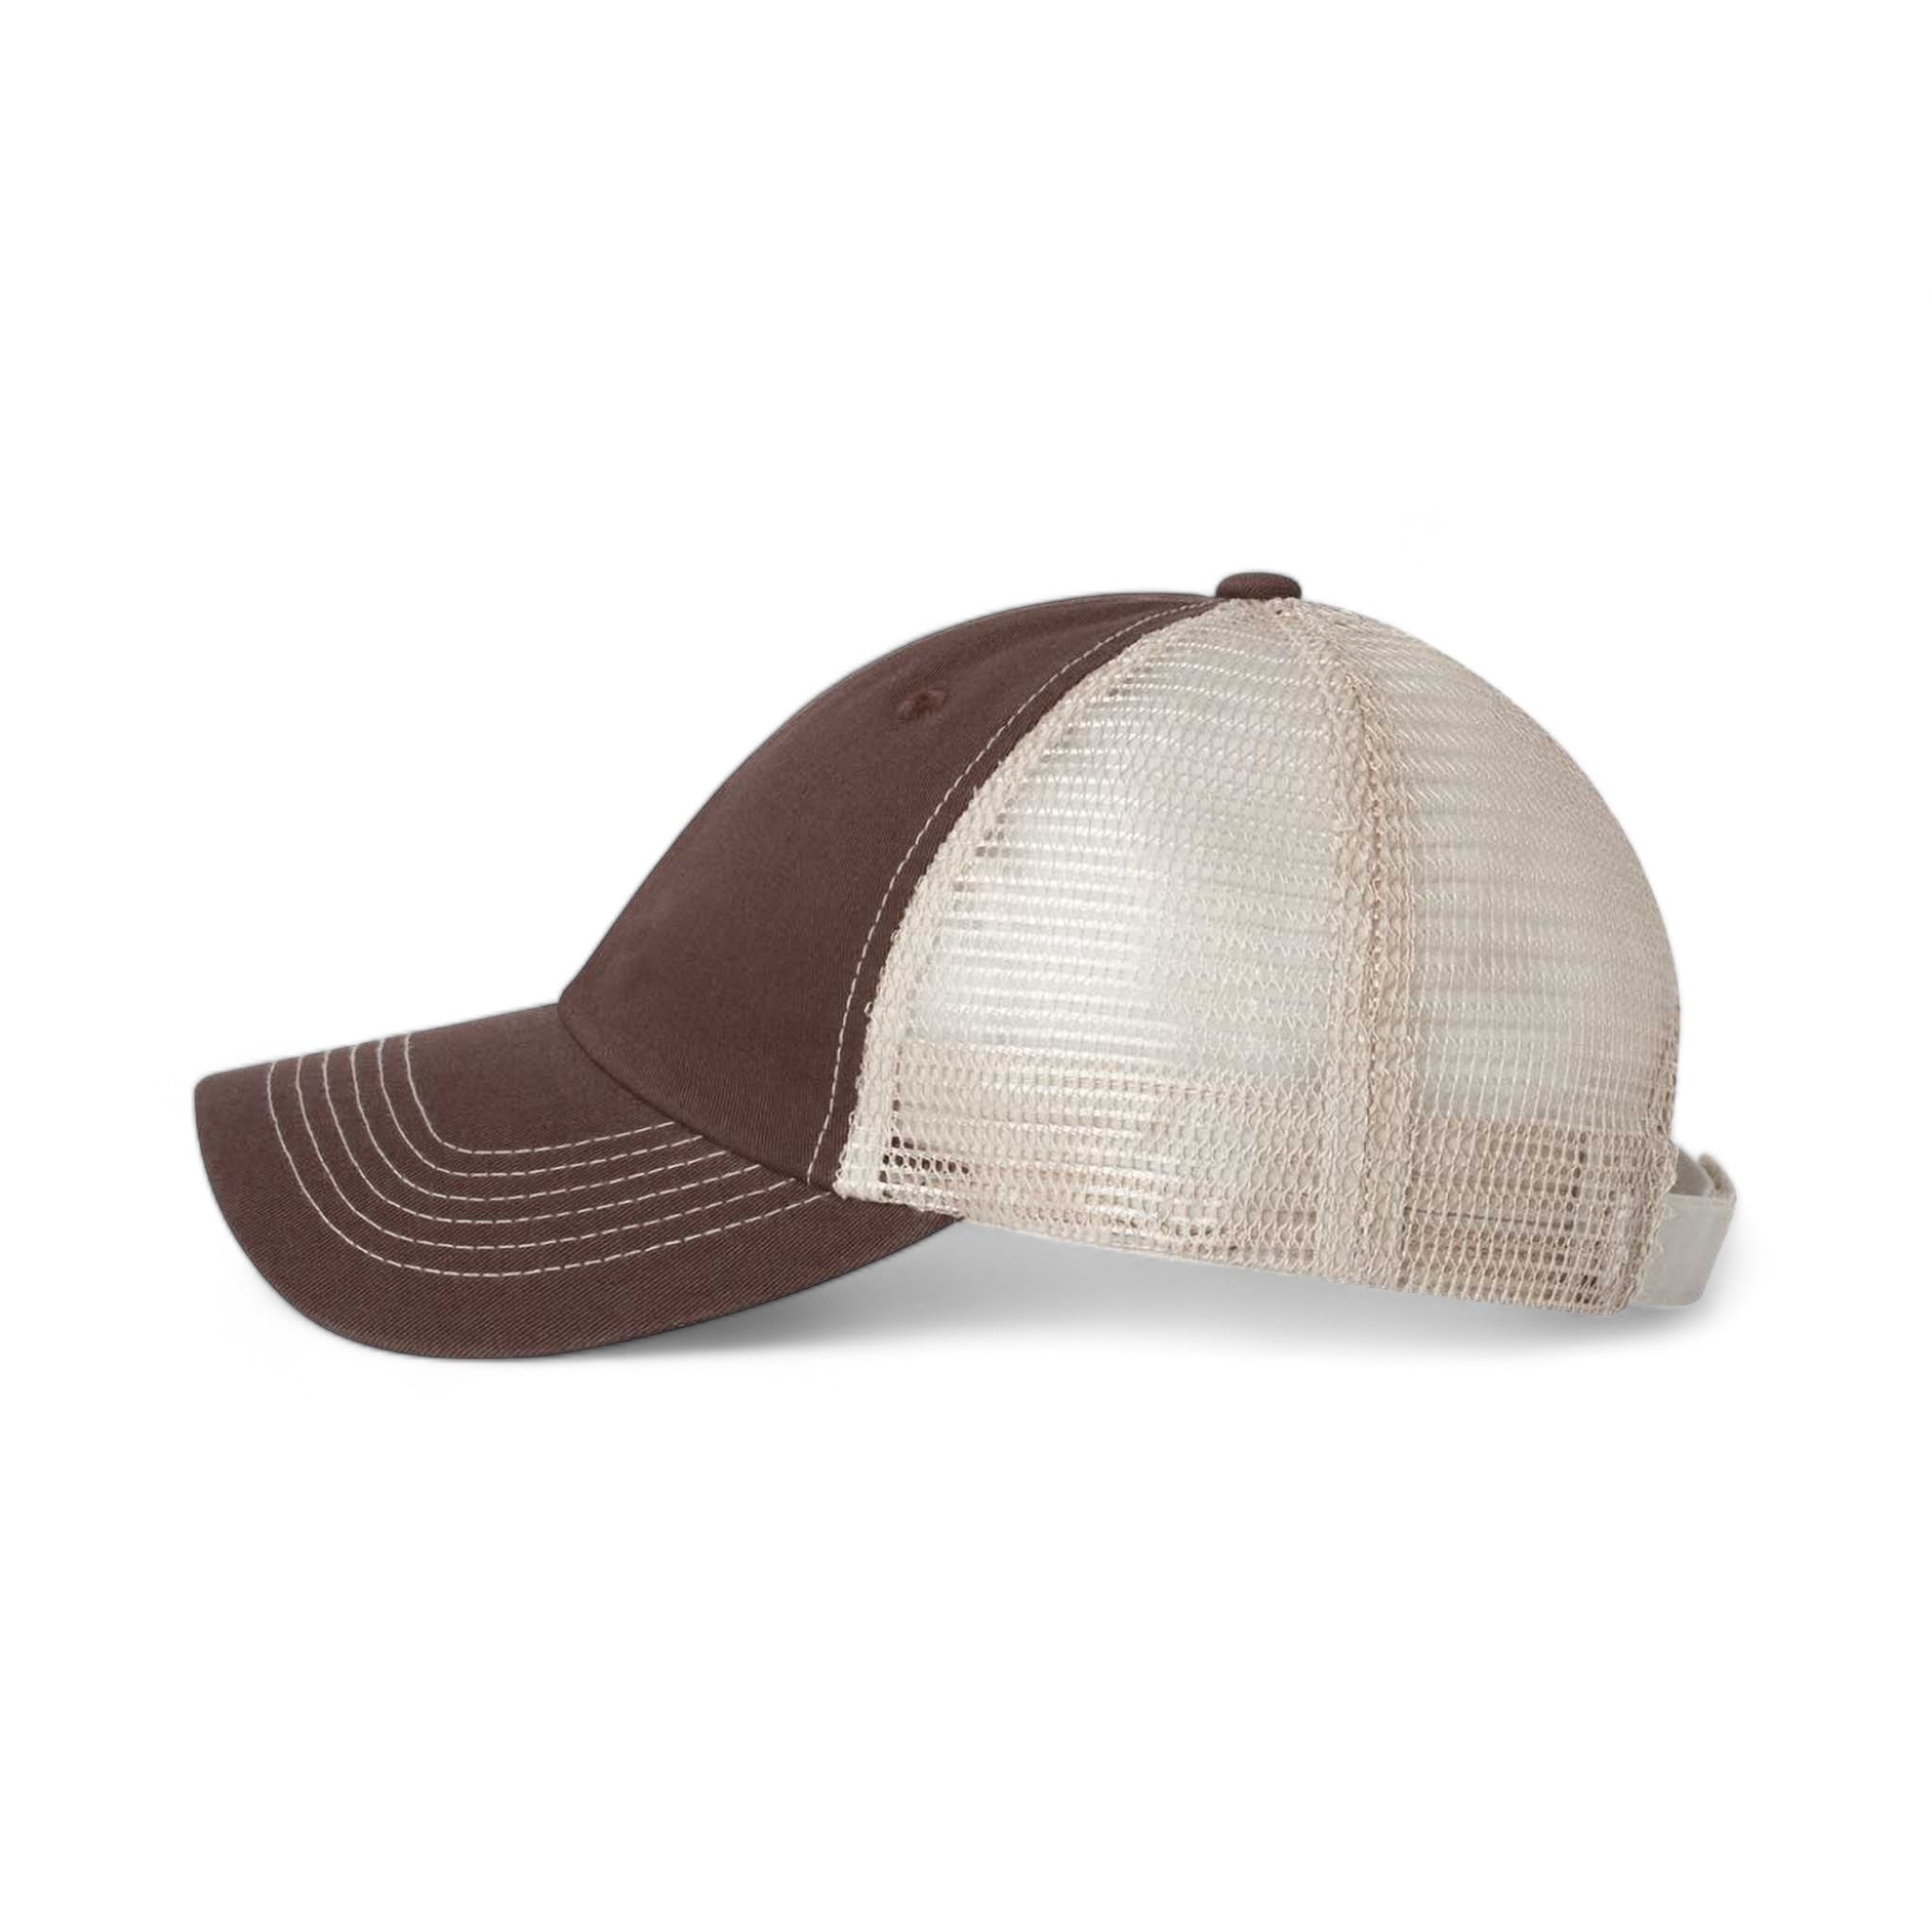 Side view of Sportsman 3100 custom hat in brown and stone